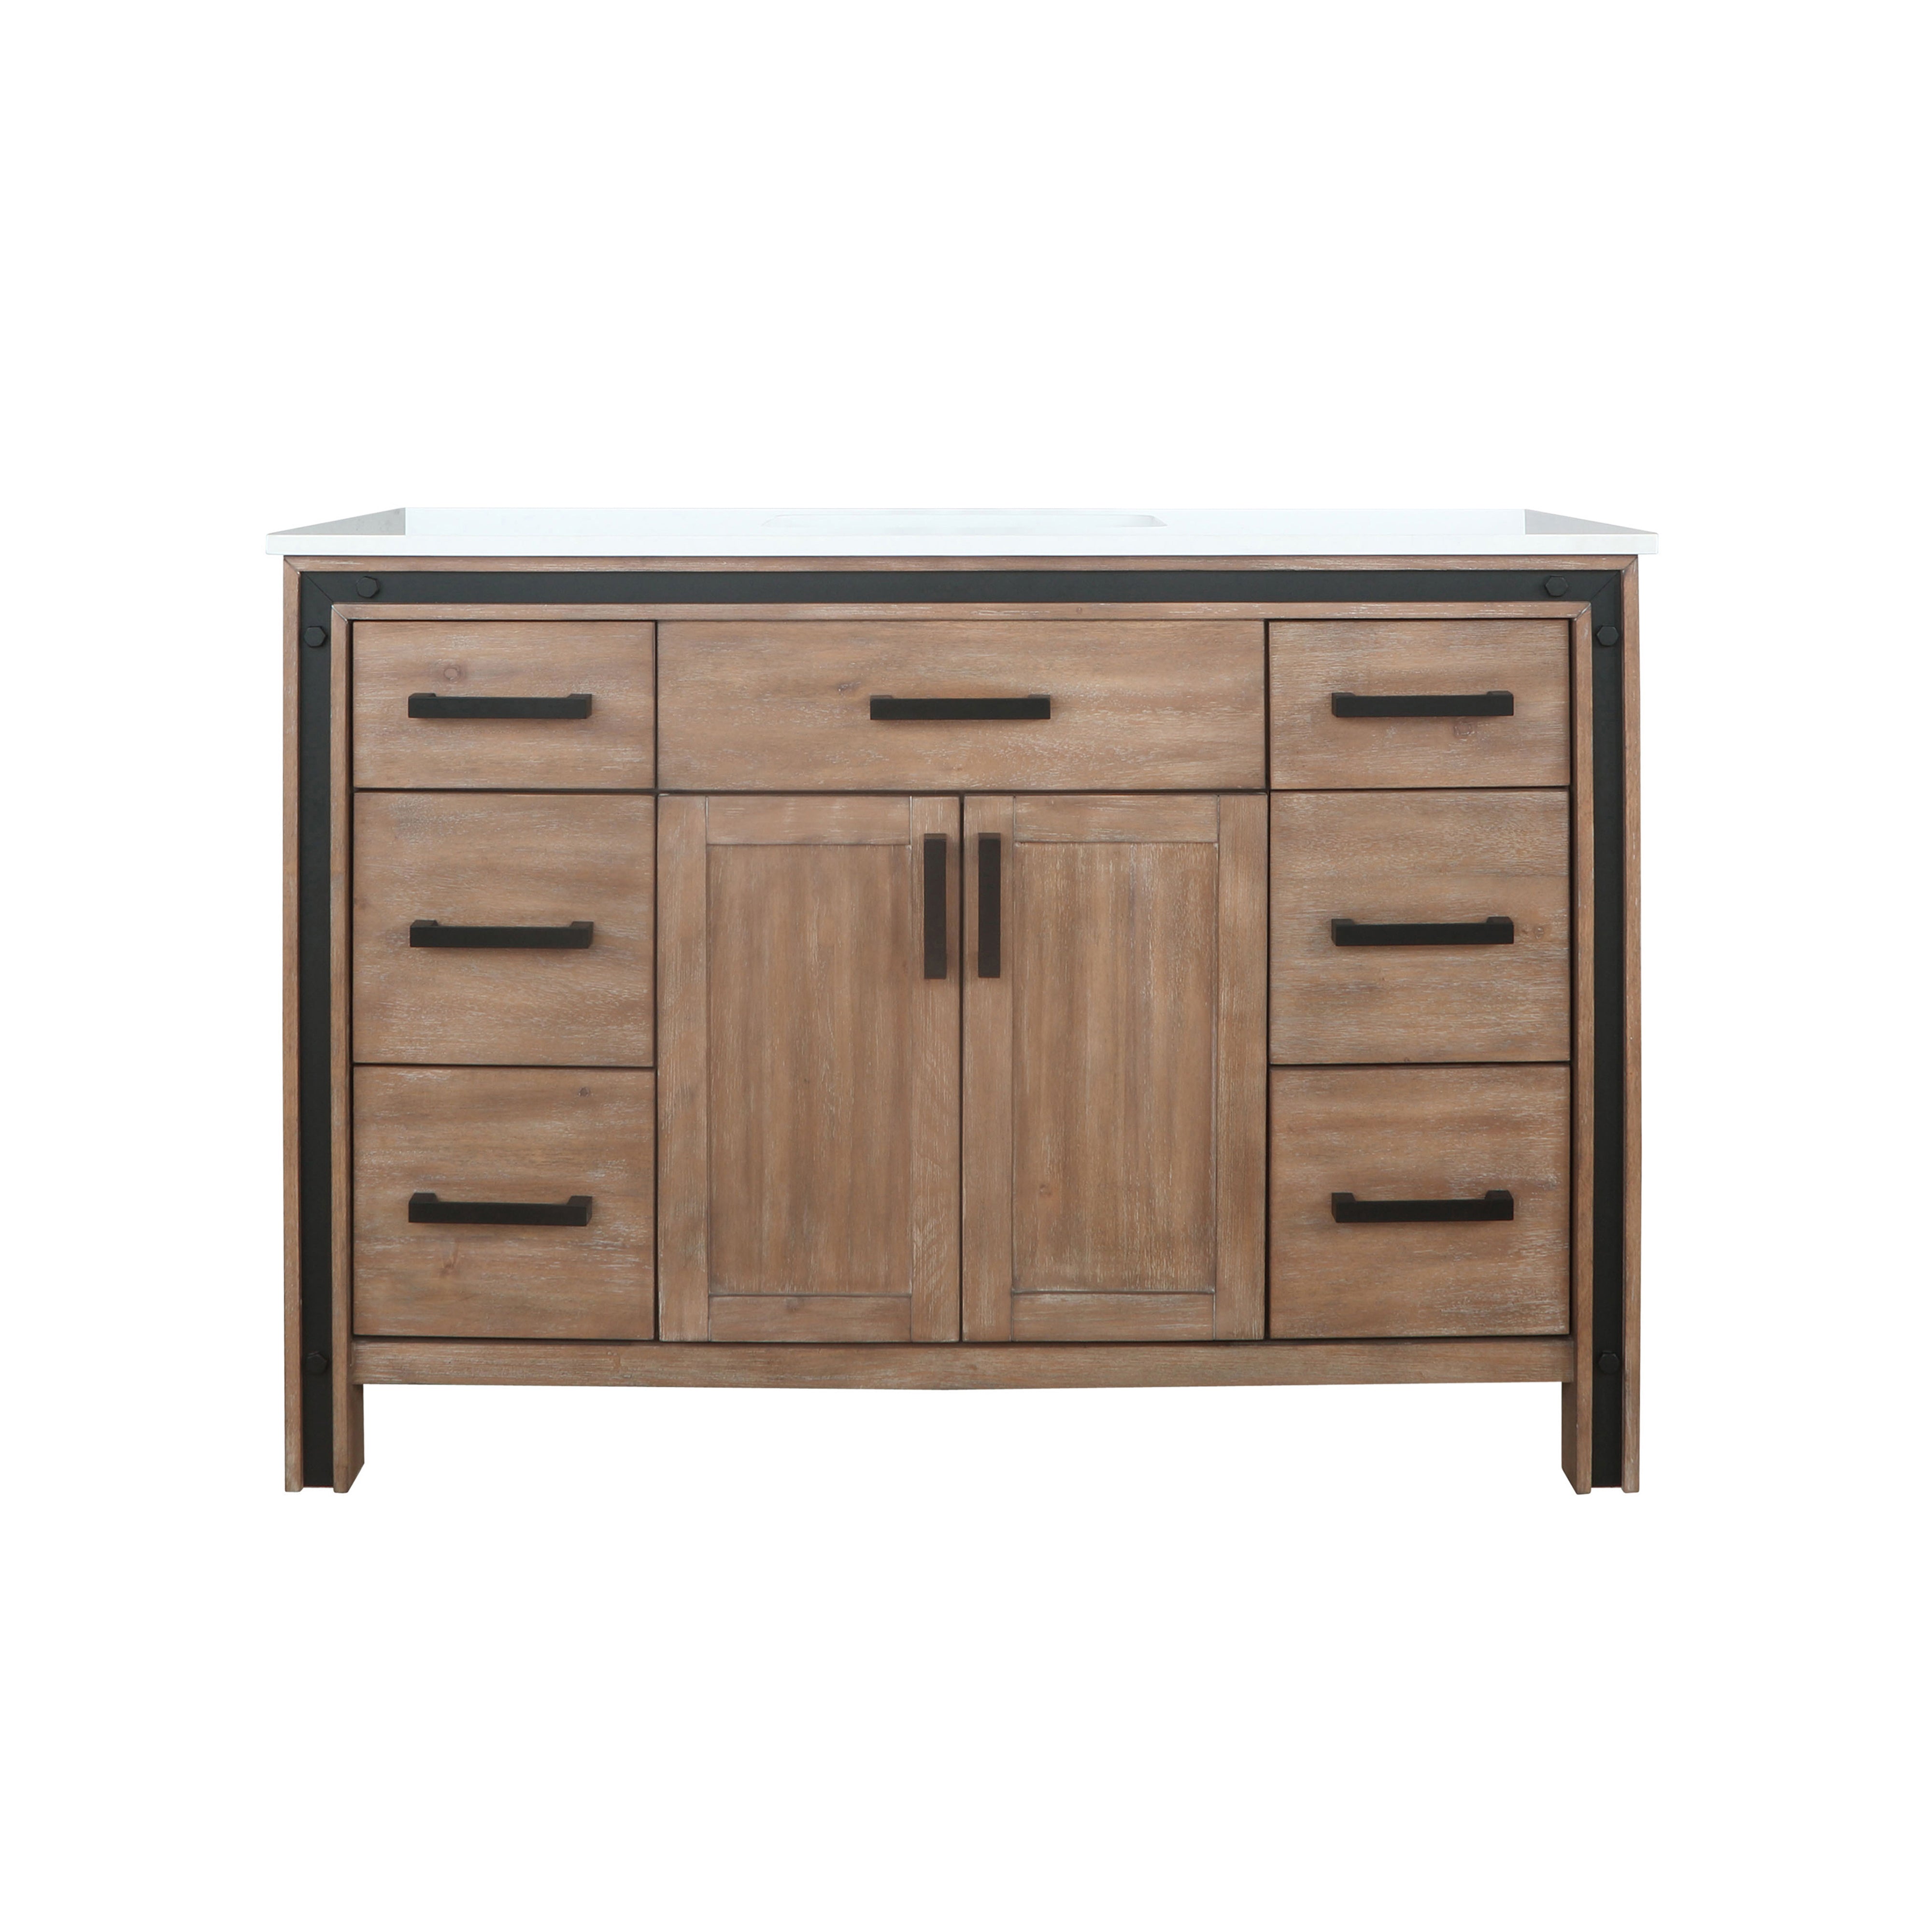 Lexora Ziva LZV352248SNJS000 48" Single Bathroom Vanity in Rustic Barnwood with Cultured Marble, Integrated Sink, Front View